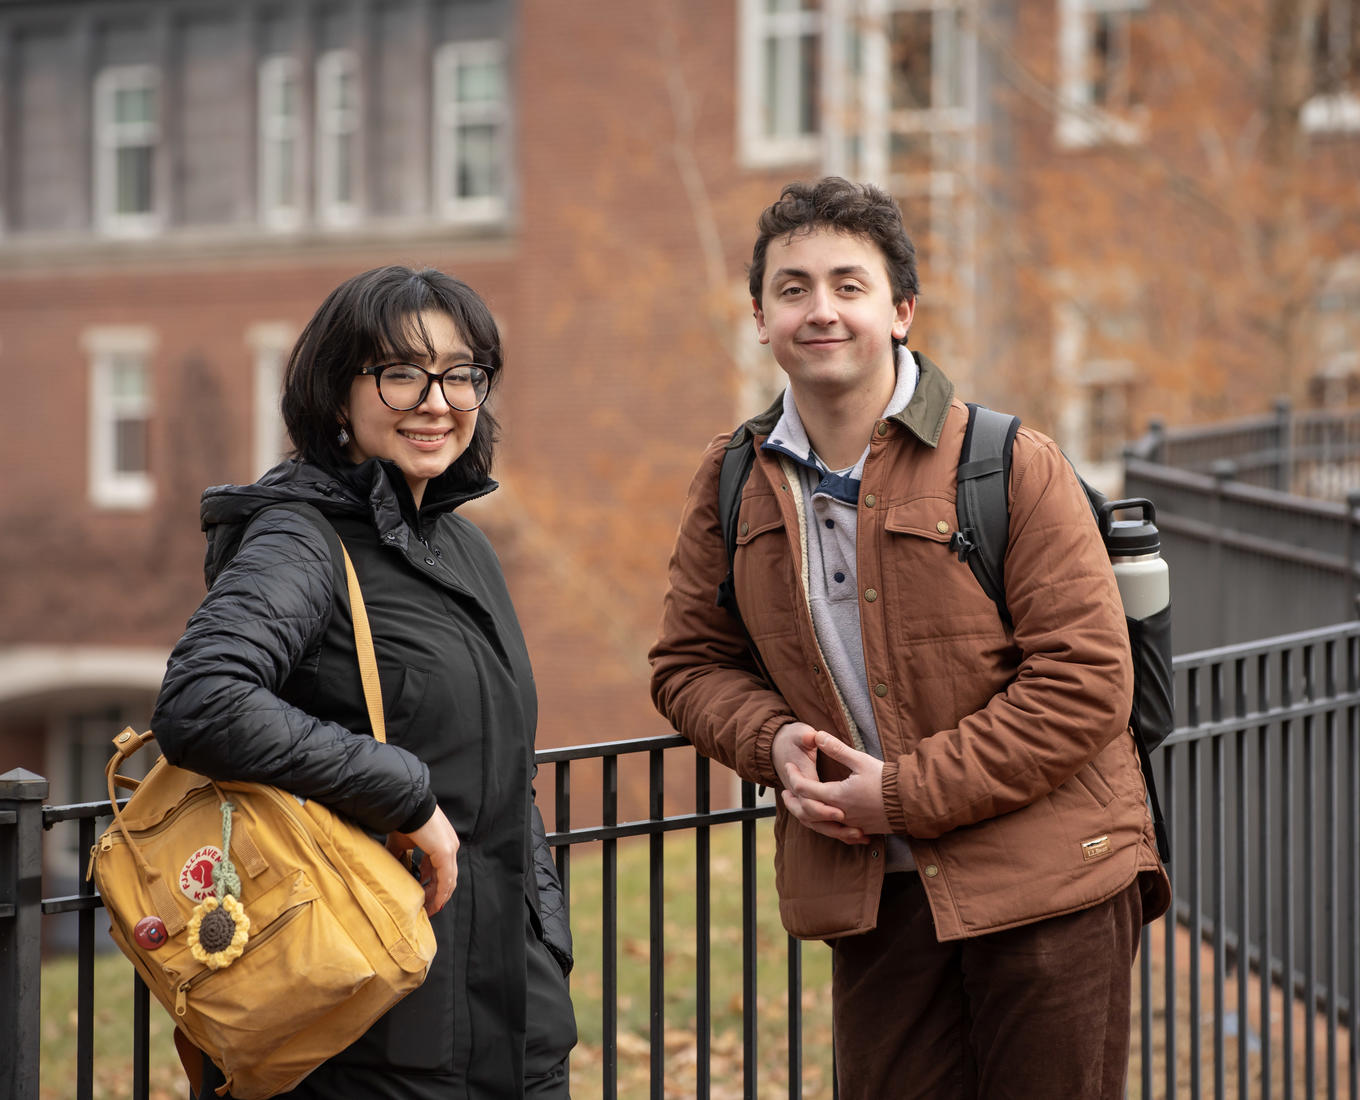 A female and a male student pose for a picture in front of a brick building.